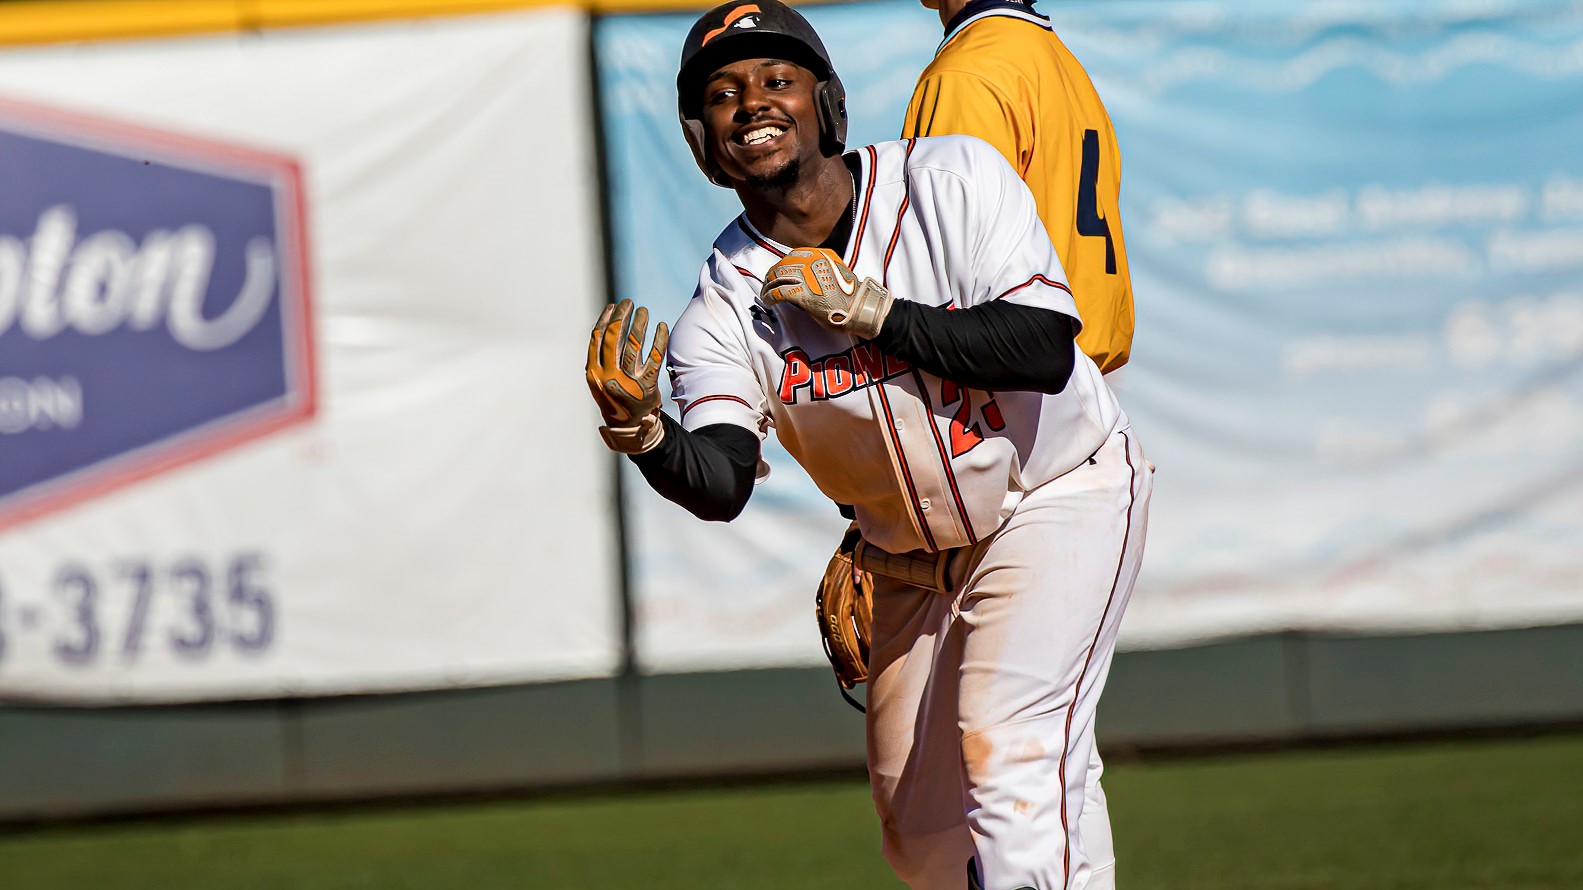 Darien Farley went 4-for-4 and drove in both runs in Tusculum's 2-1 win over Coker (photography by Chuck Williams